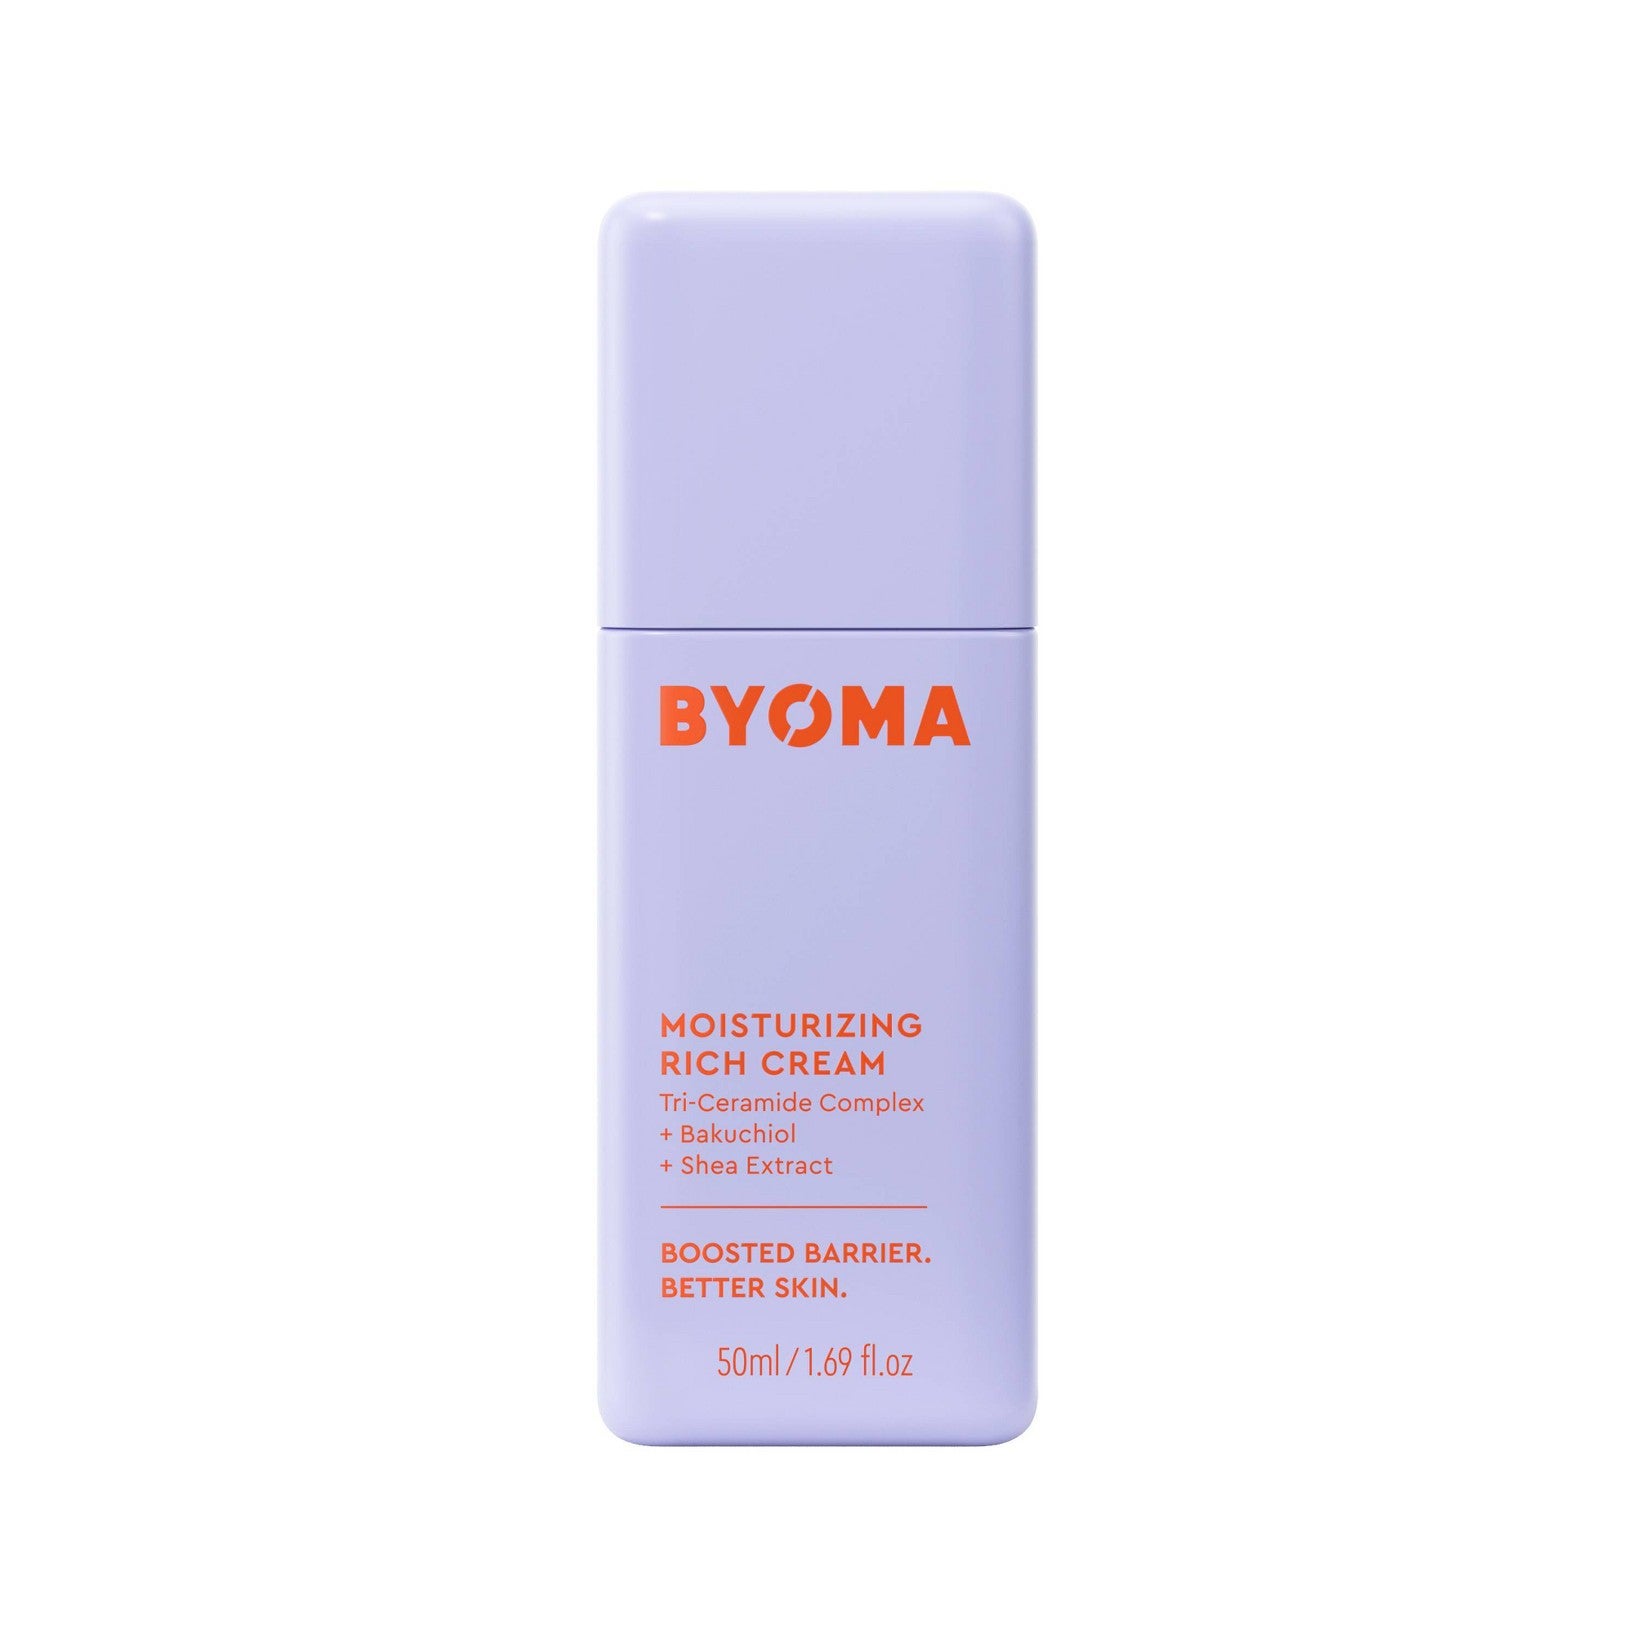 Is Byoma Skincare Worth It? Here's Our Honest Review